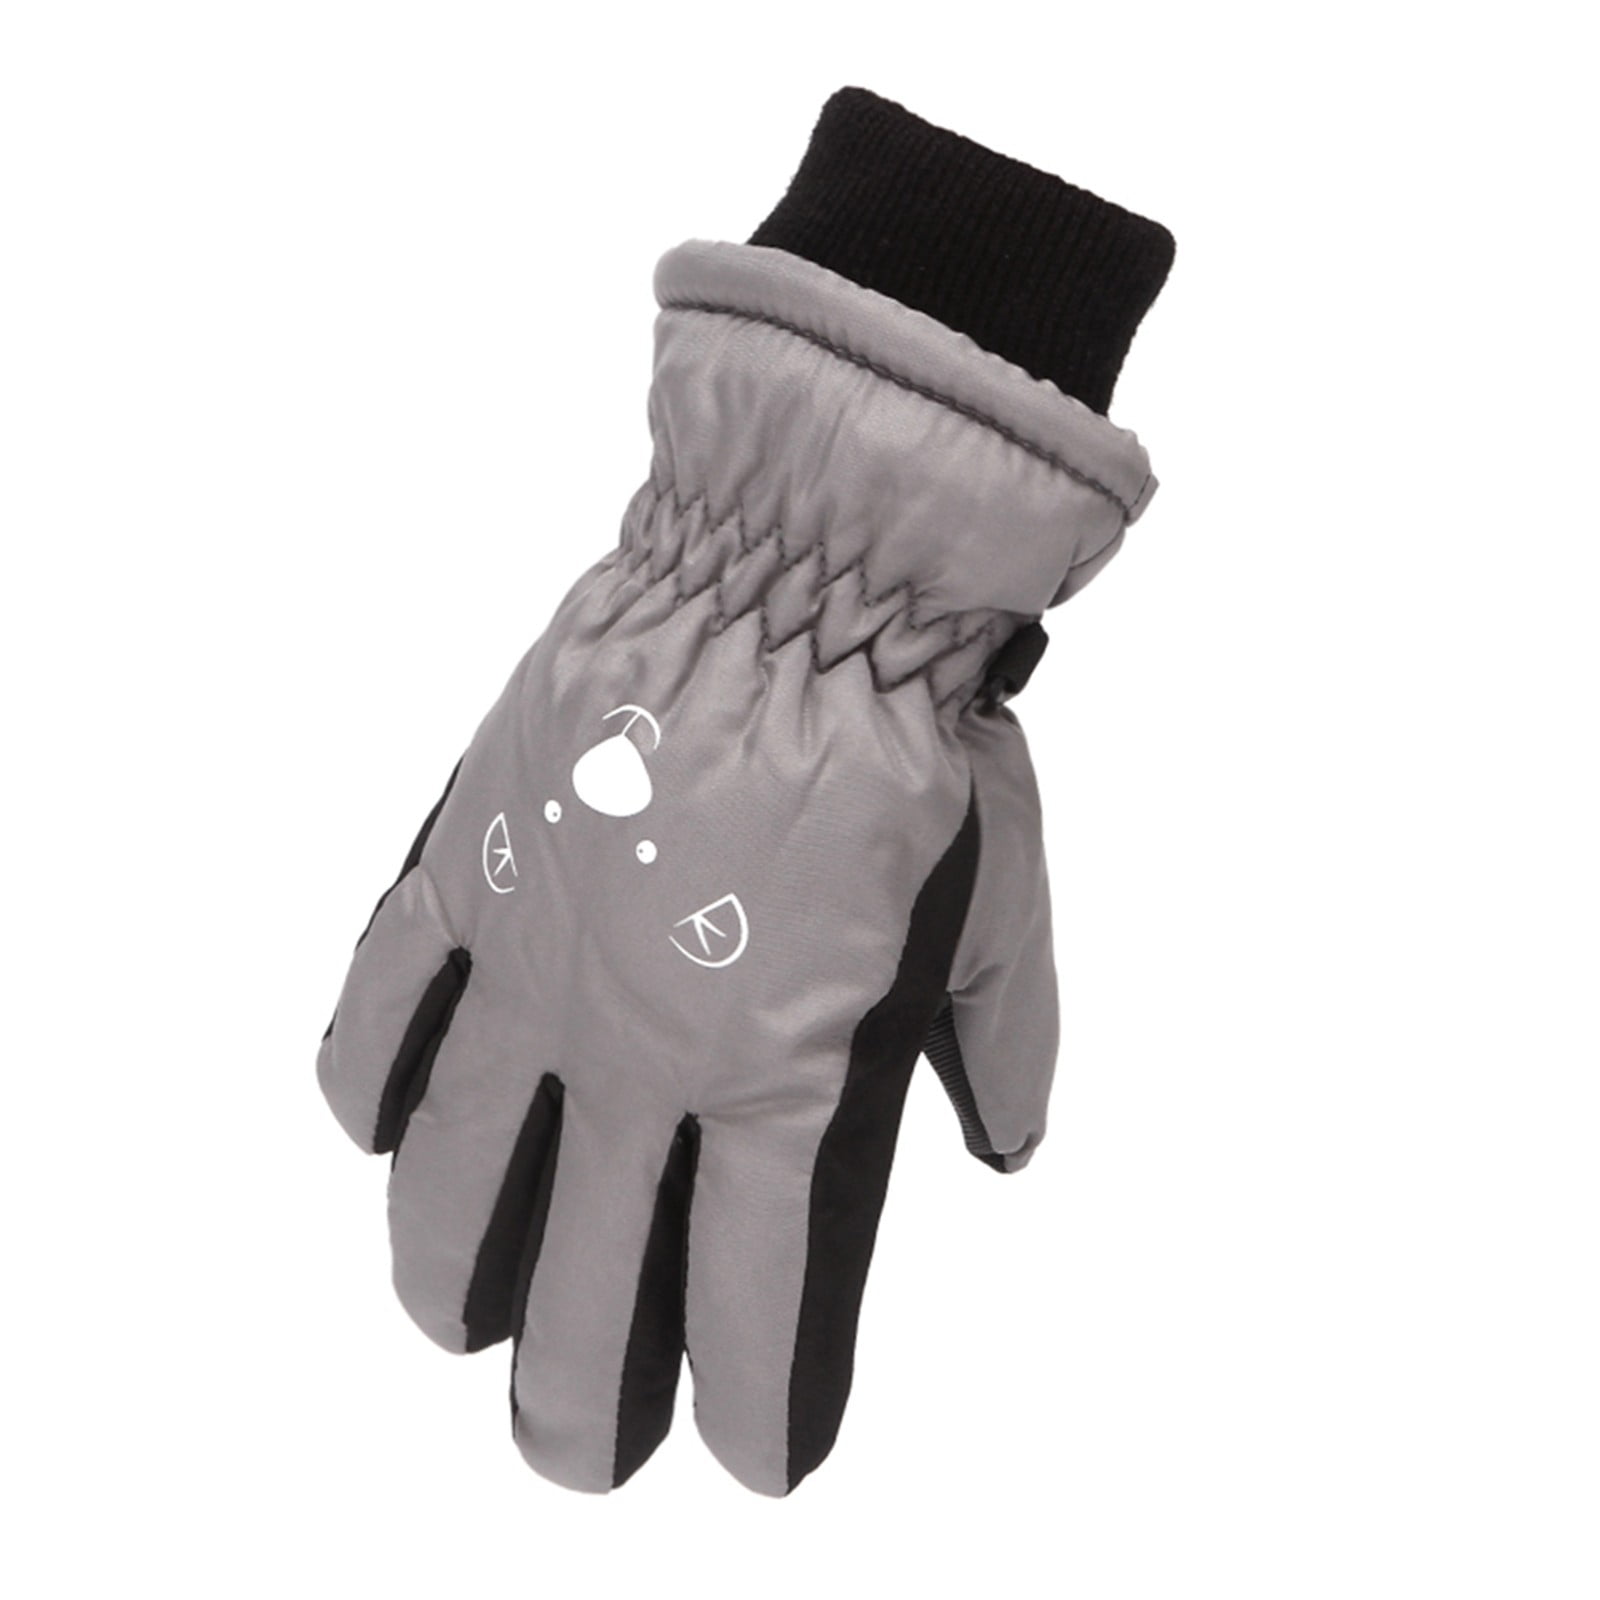 TBUIALL Kids M/L Boys Winter Ski Warm Windproof Snowboarding Outdoor Snow  Size Skating Gloves Girls Kids Winter Gloves Ages 4-6